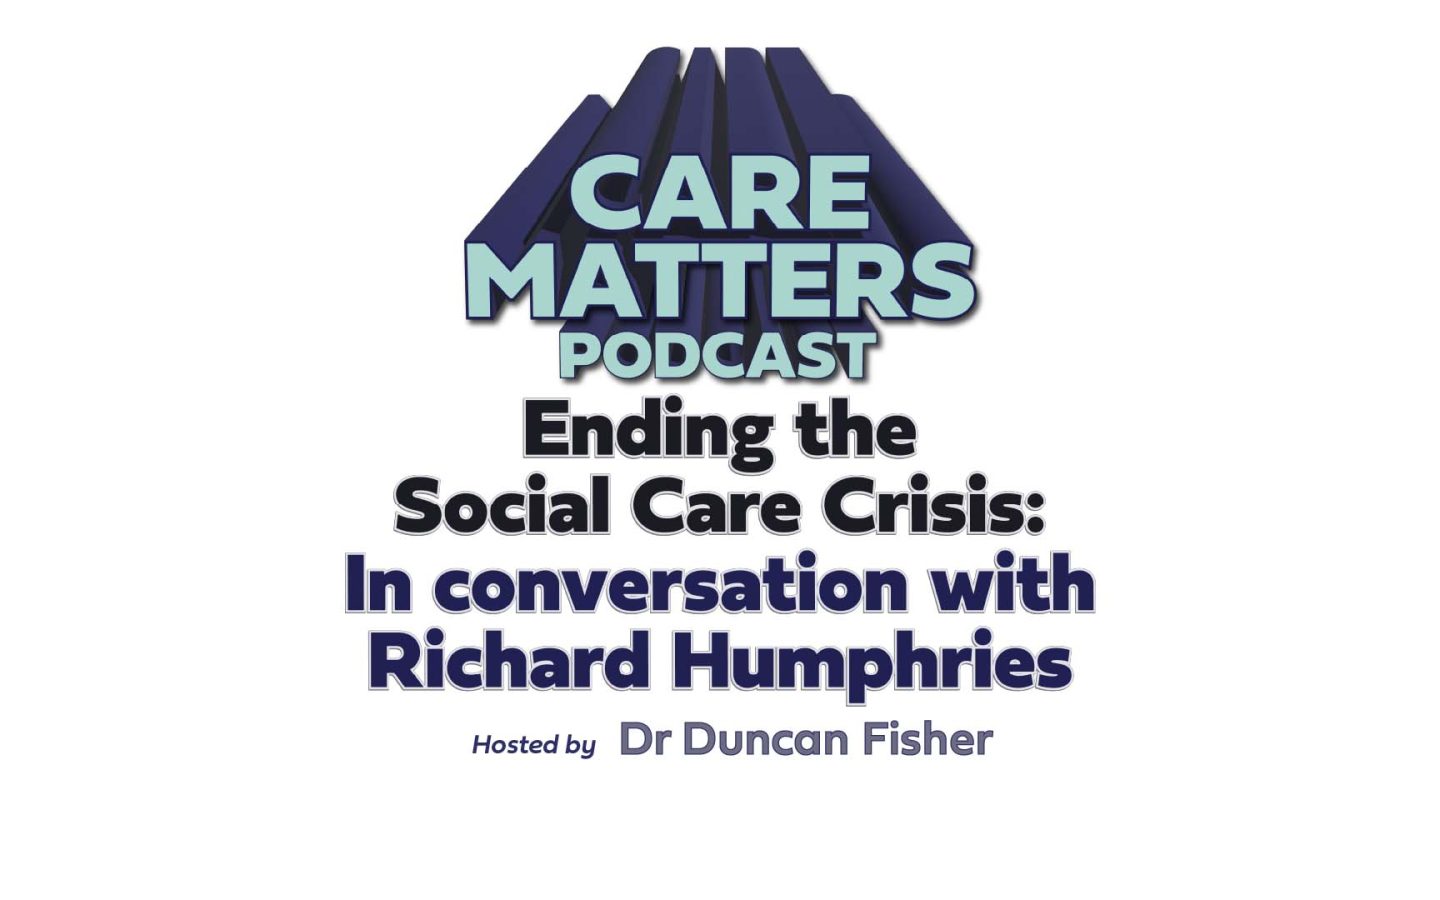 Text: Care Matters Podcast Ending the Social Care Crisis: In conversation with Richard Humphries, hosted by Dr Duncan Fisher